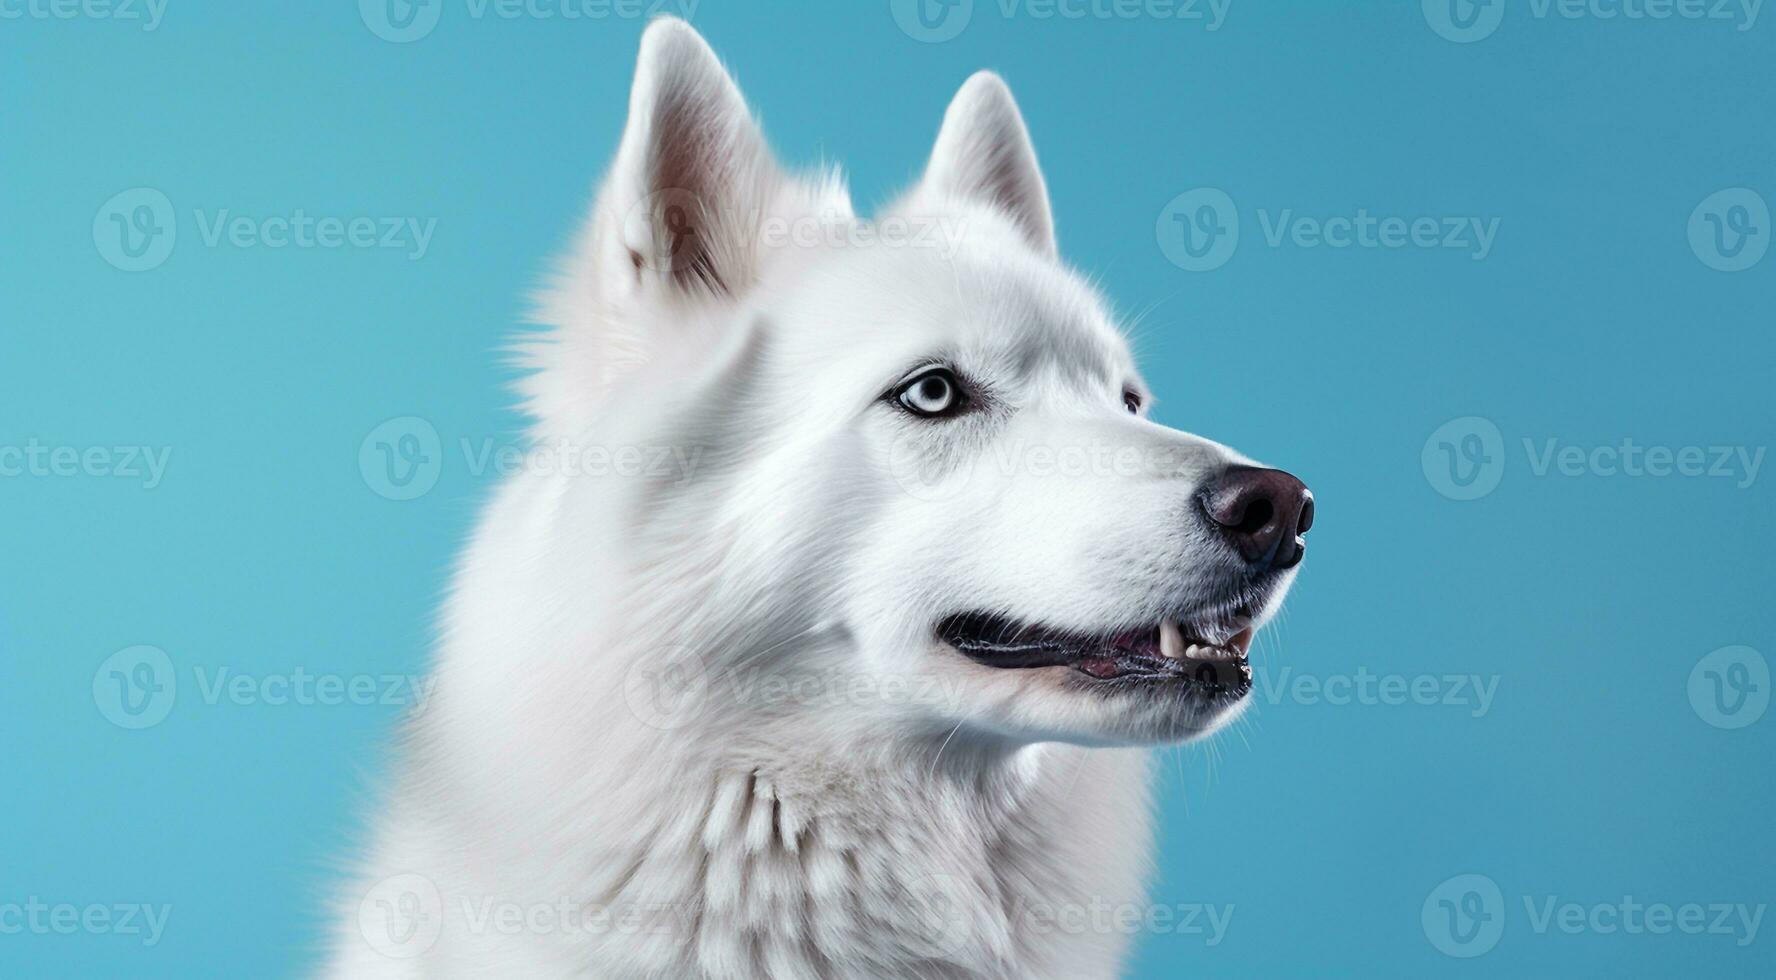 AI generated dog on the abstract background, dog face, close-up of dog face, dog portrait on background, looking dog photo